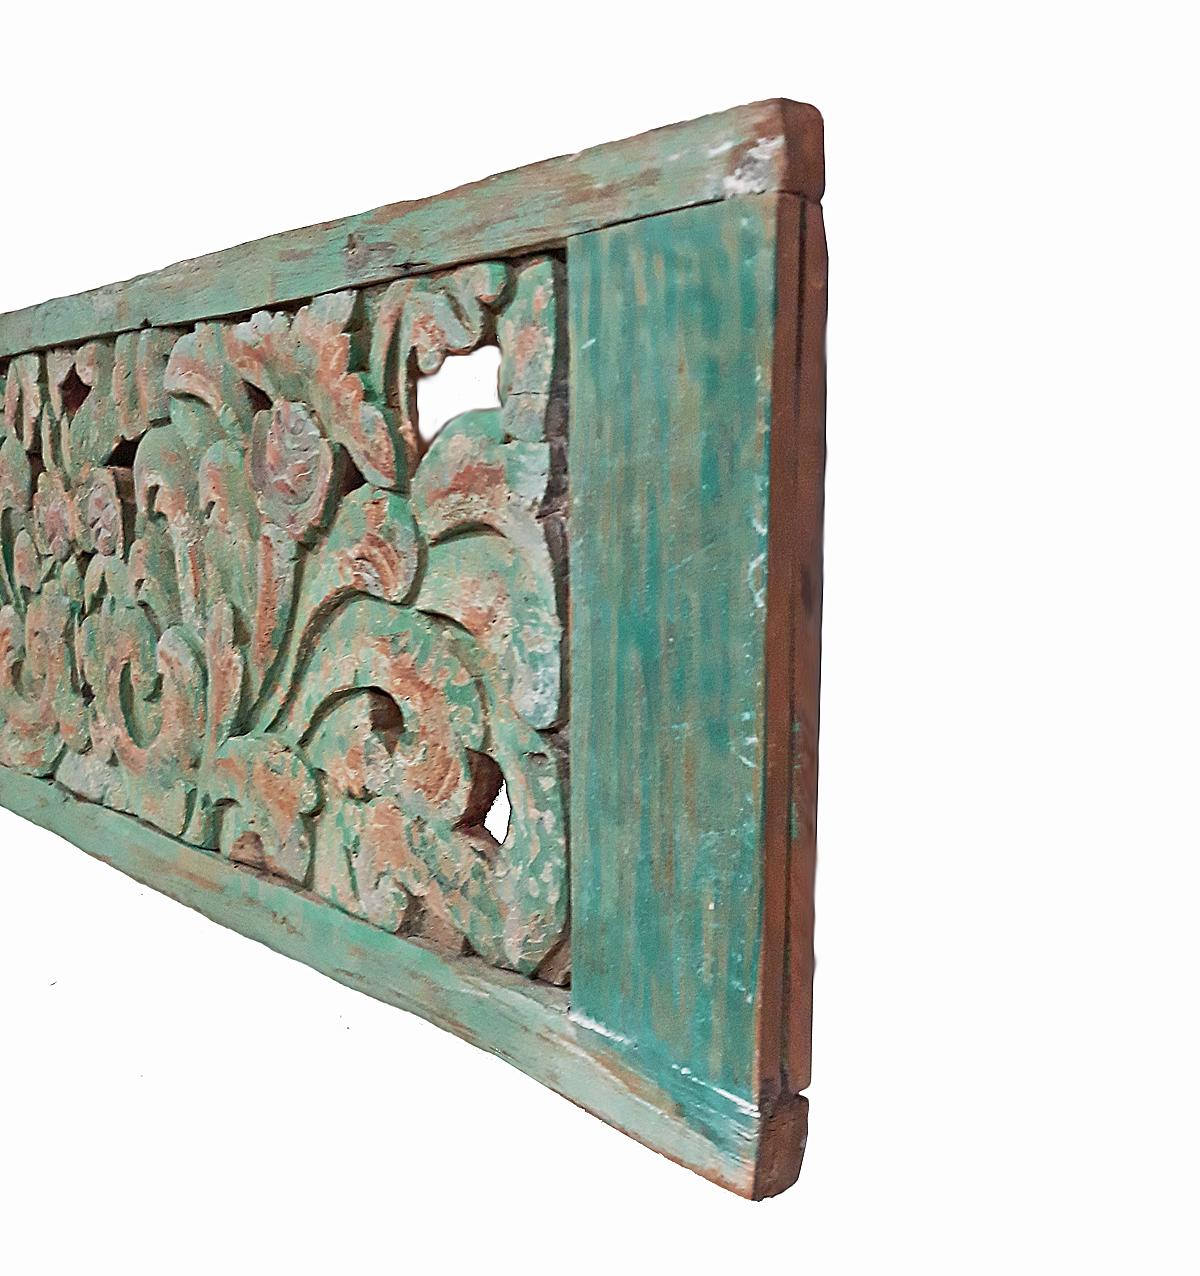 An early 20th century teak wood panel from Indonesia, intricately hand carved with a floral motif and polychromed in deep green, circa 1900.